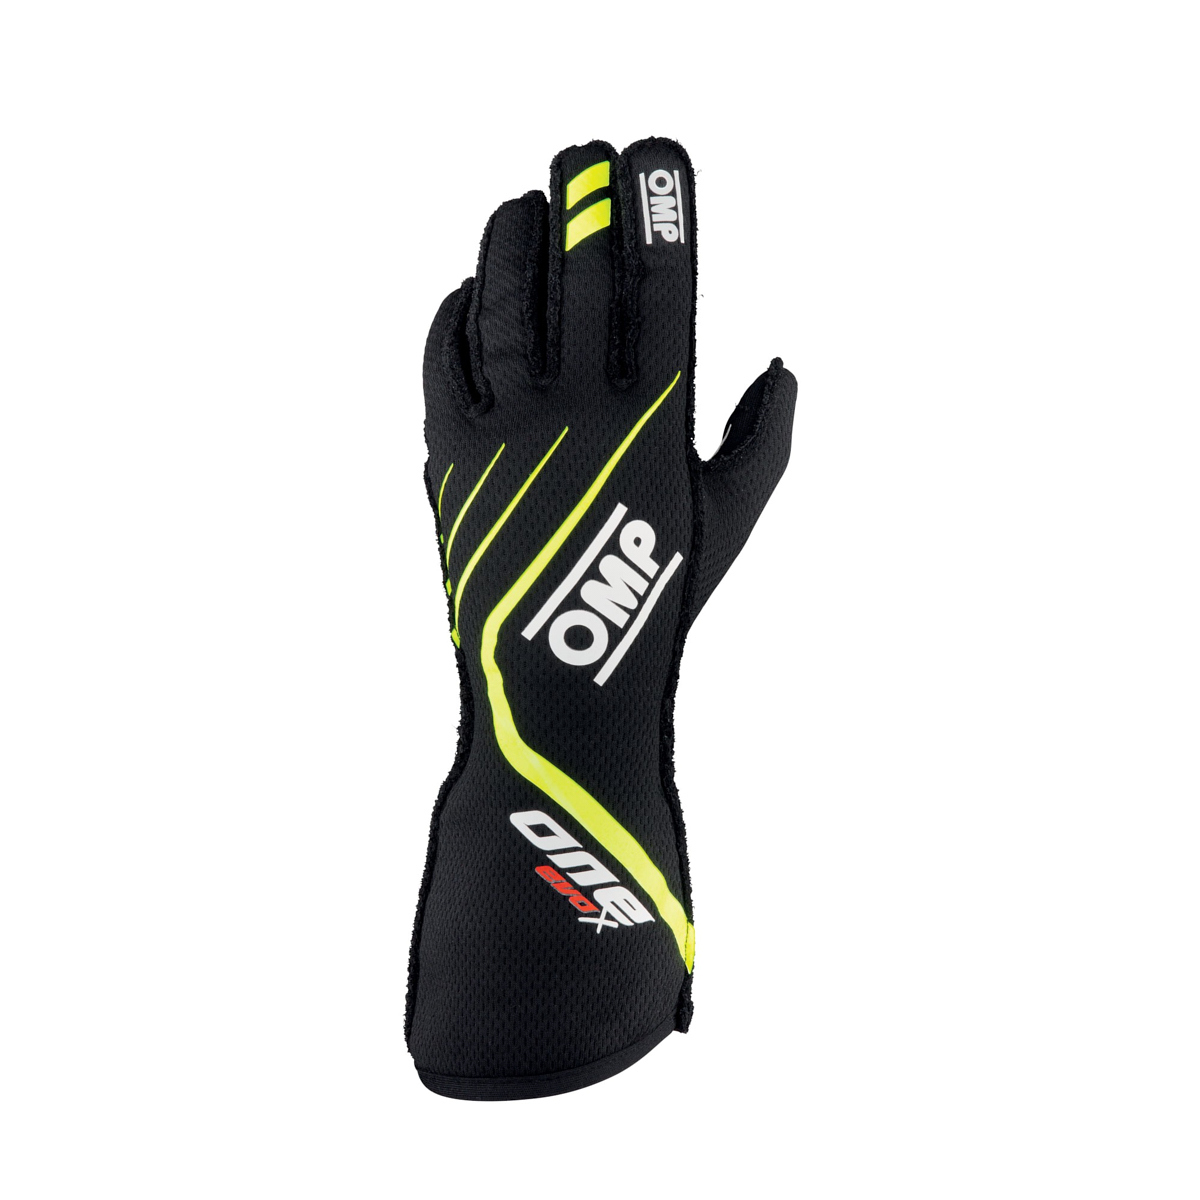 OMP Racing IB771NGIXL Driving Gloves, One EVO X, FIA Approved, Double Layer, Fire Retardant Fabric, Black / Fluorescent Yellow, X-Large, Pair